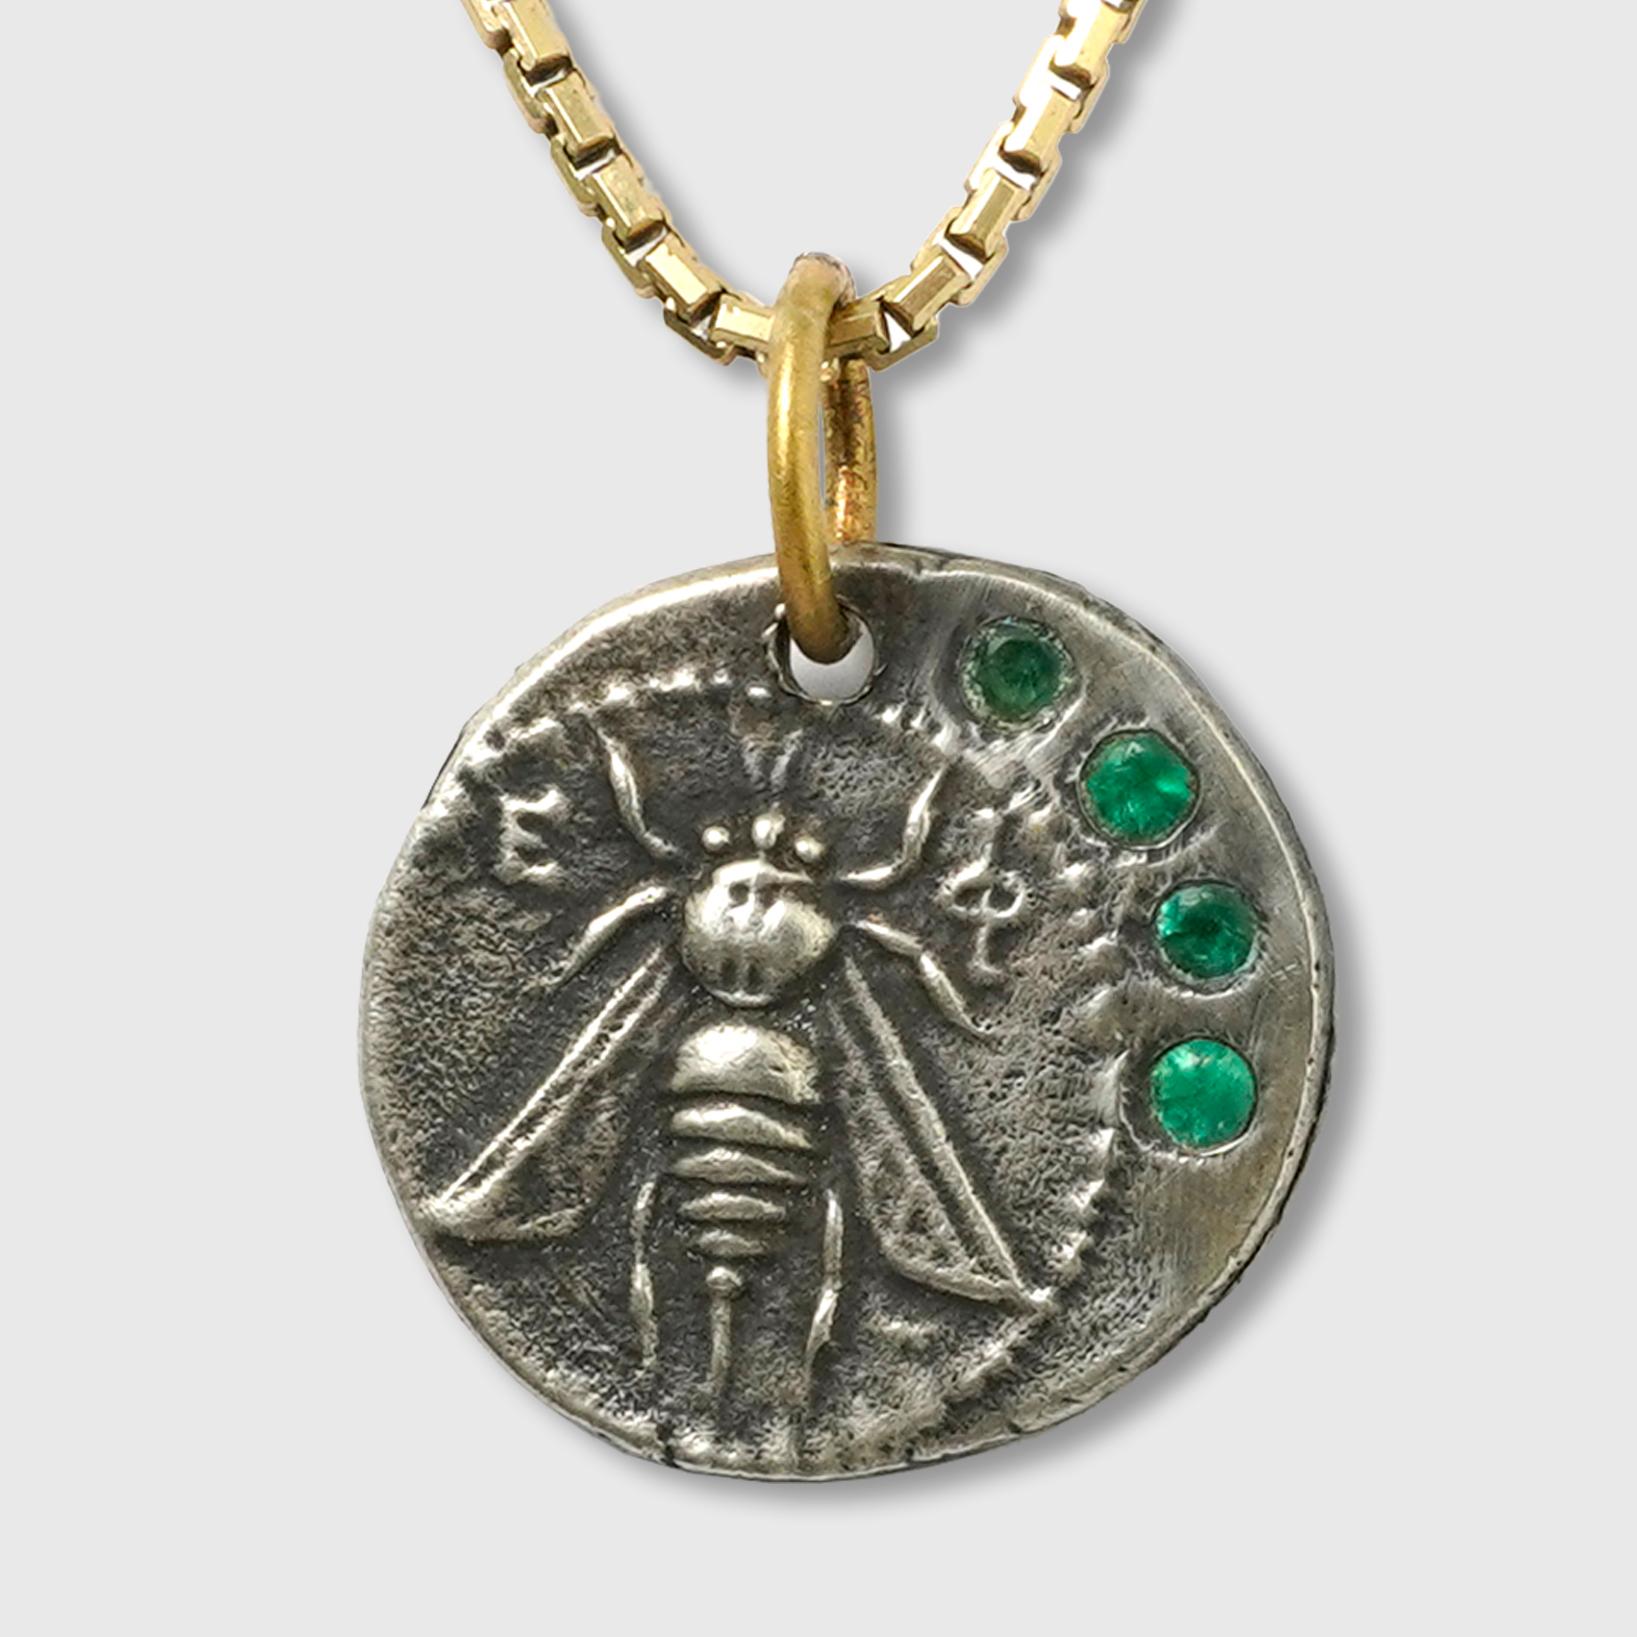 Ephesus, Queen Bee, Tetra Drachm, Charm Pendant, 24kt Yellow Gold, Silver & 0.10ct Emeralds.

Sterling Silver coin is a replica coin from those in the Turkish Museum. 390–380 B.C., Coin (tetradrachm) of Ephesos

Size - Small, 5/8